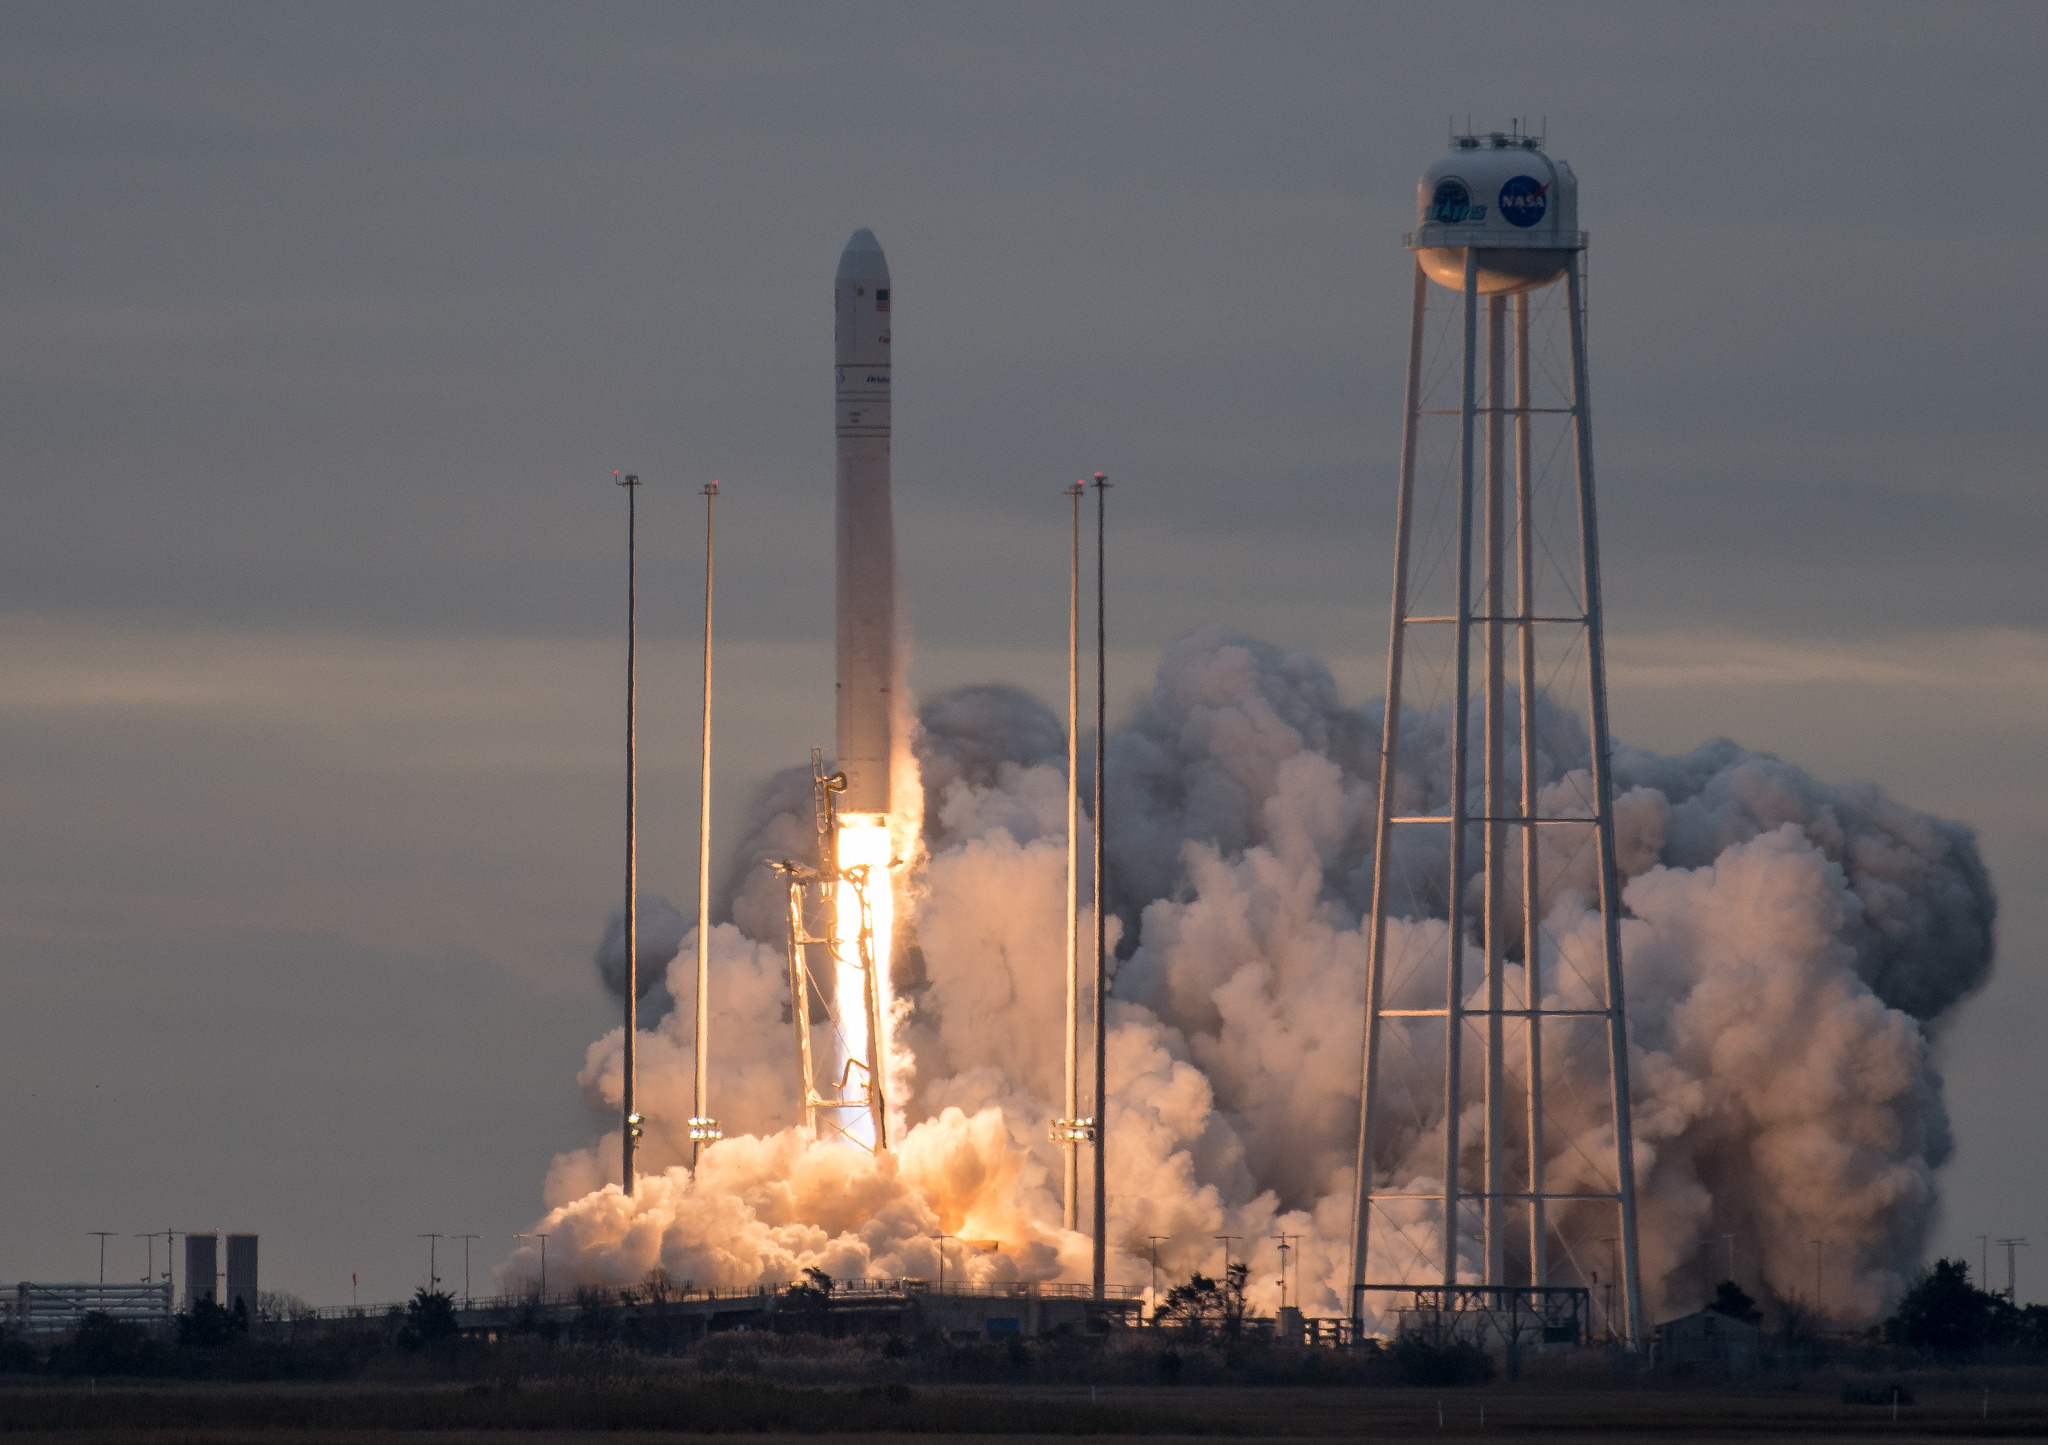 Orbital ATK’s eighth contracted cargo delivery flight